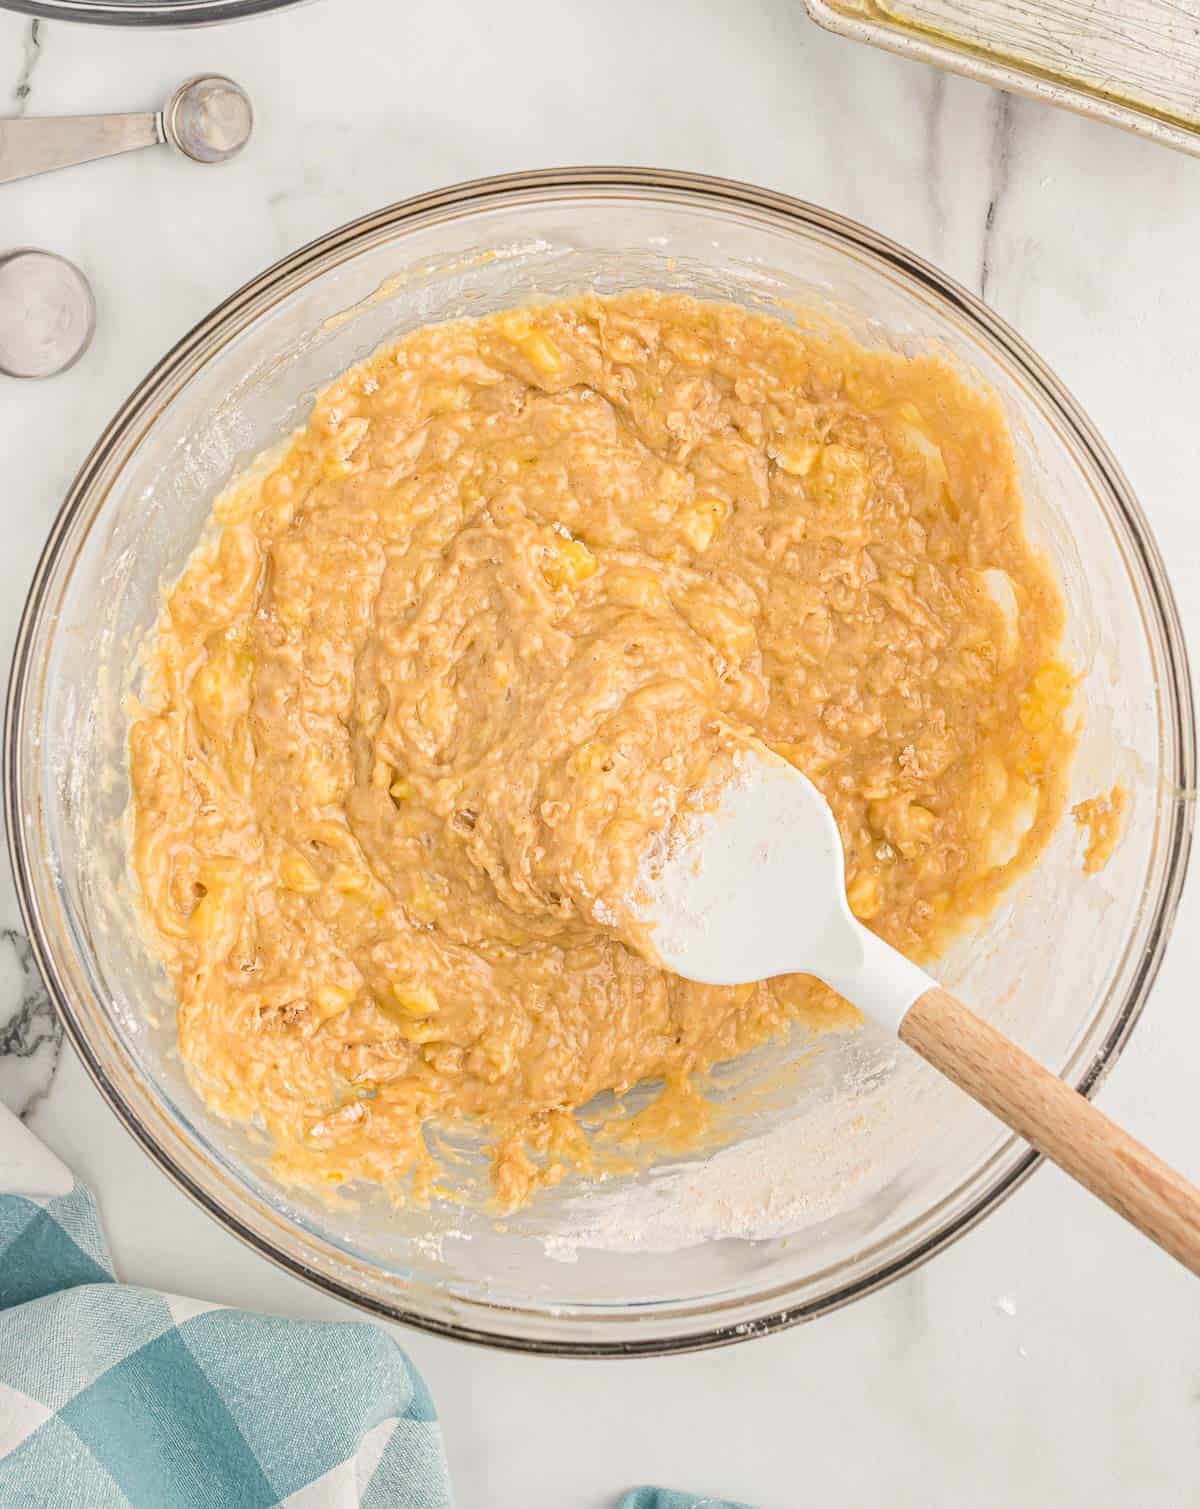 banana bread batter mixed together in a bowl